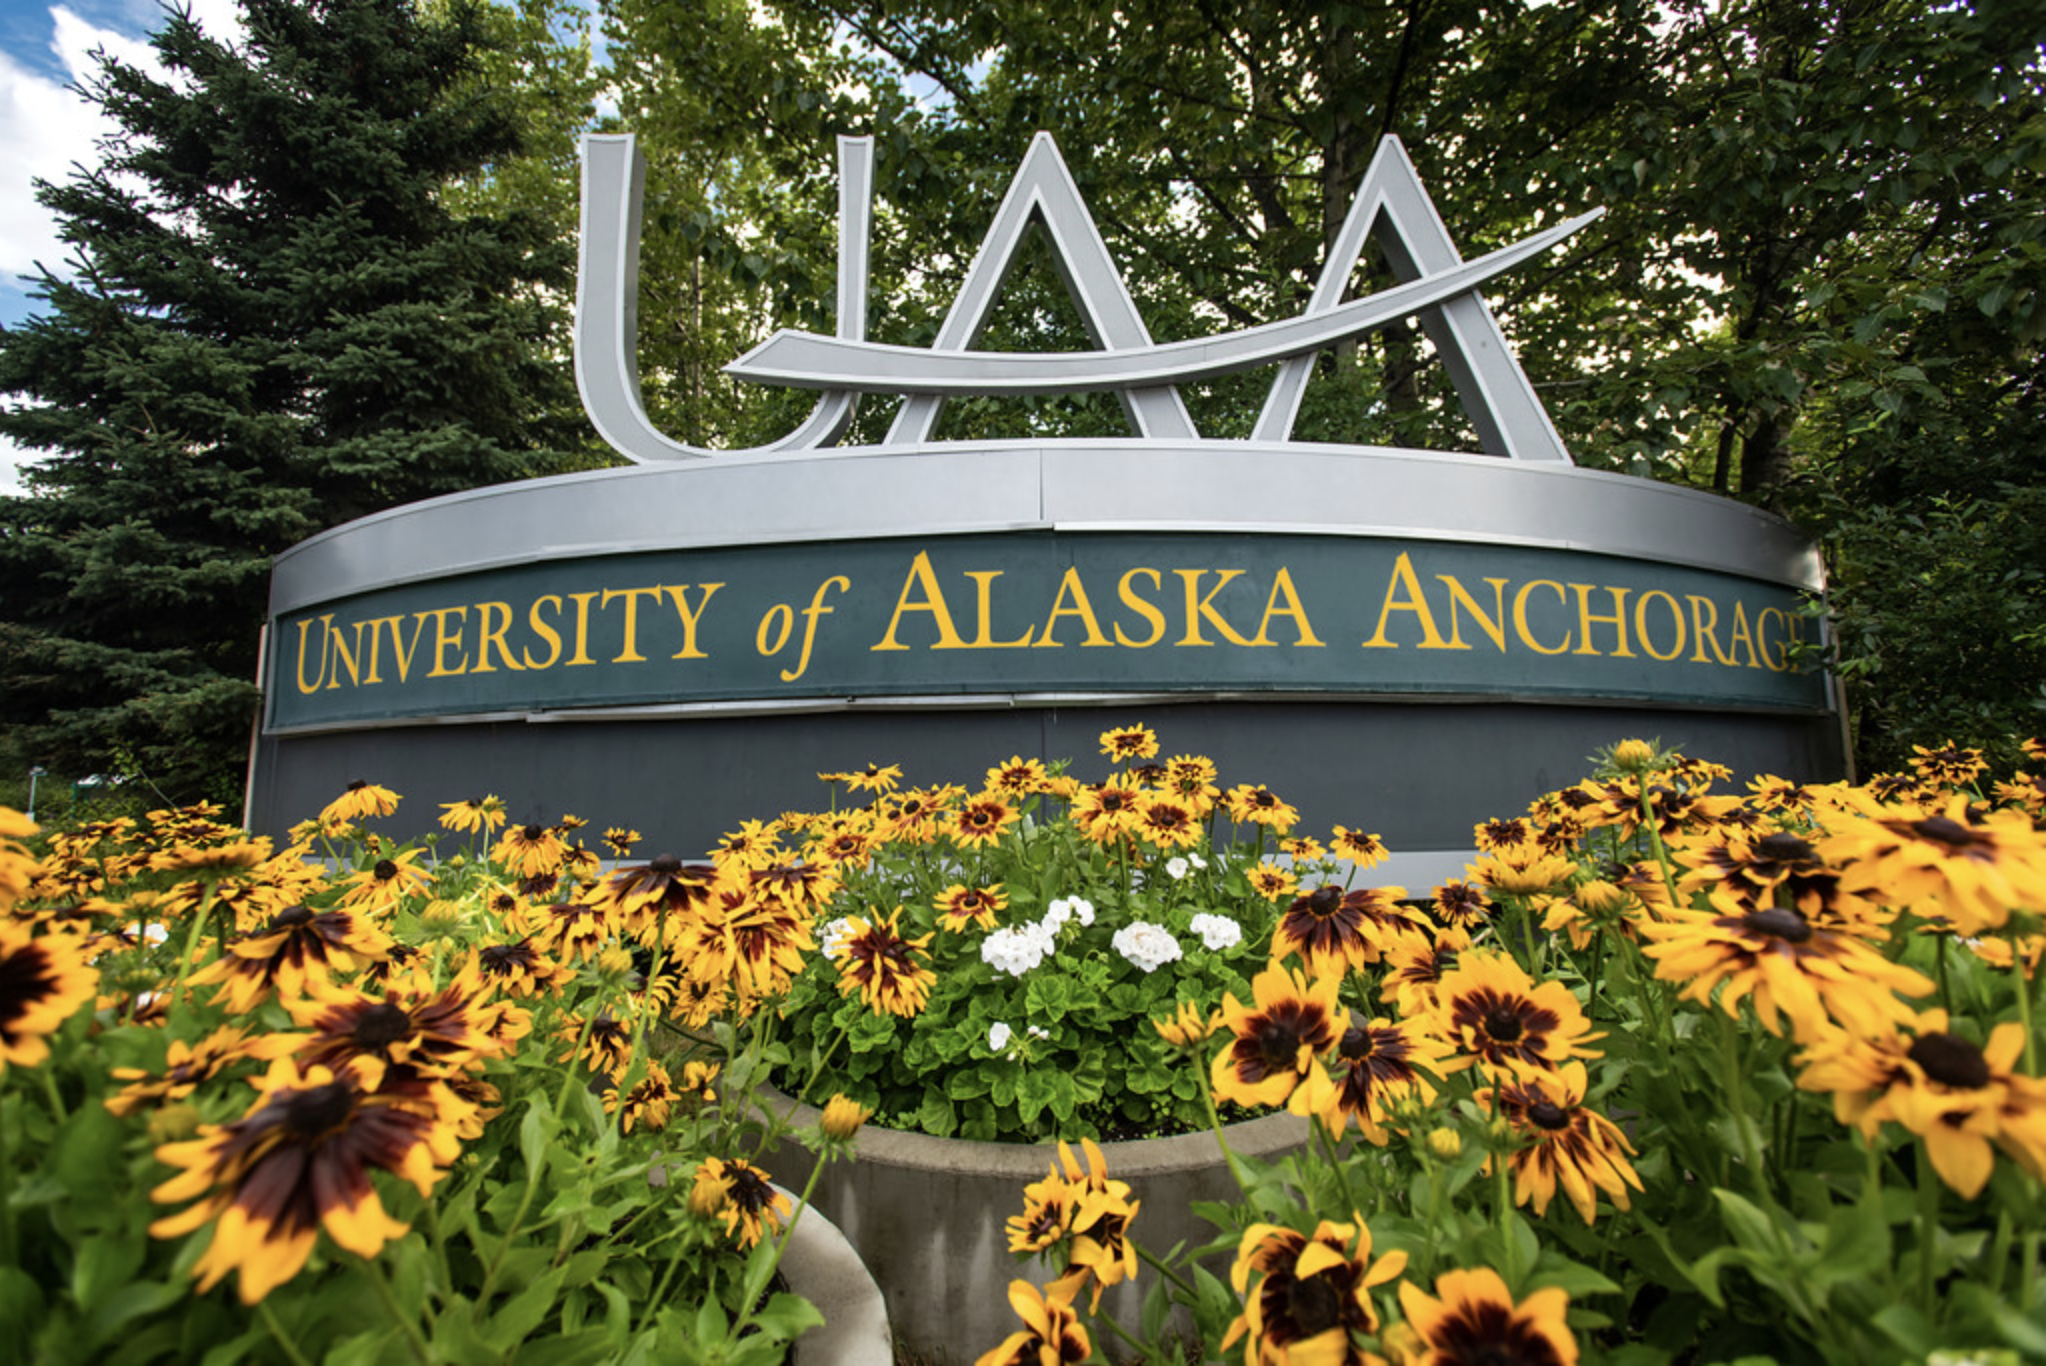 UAA sign in summer surrounded by flowers